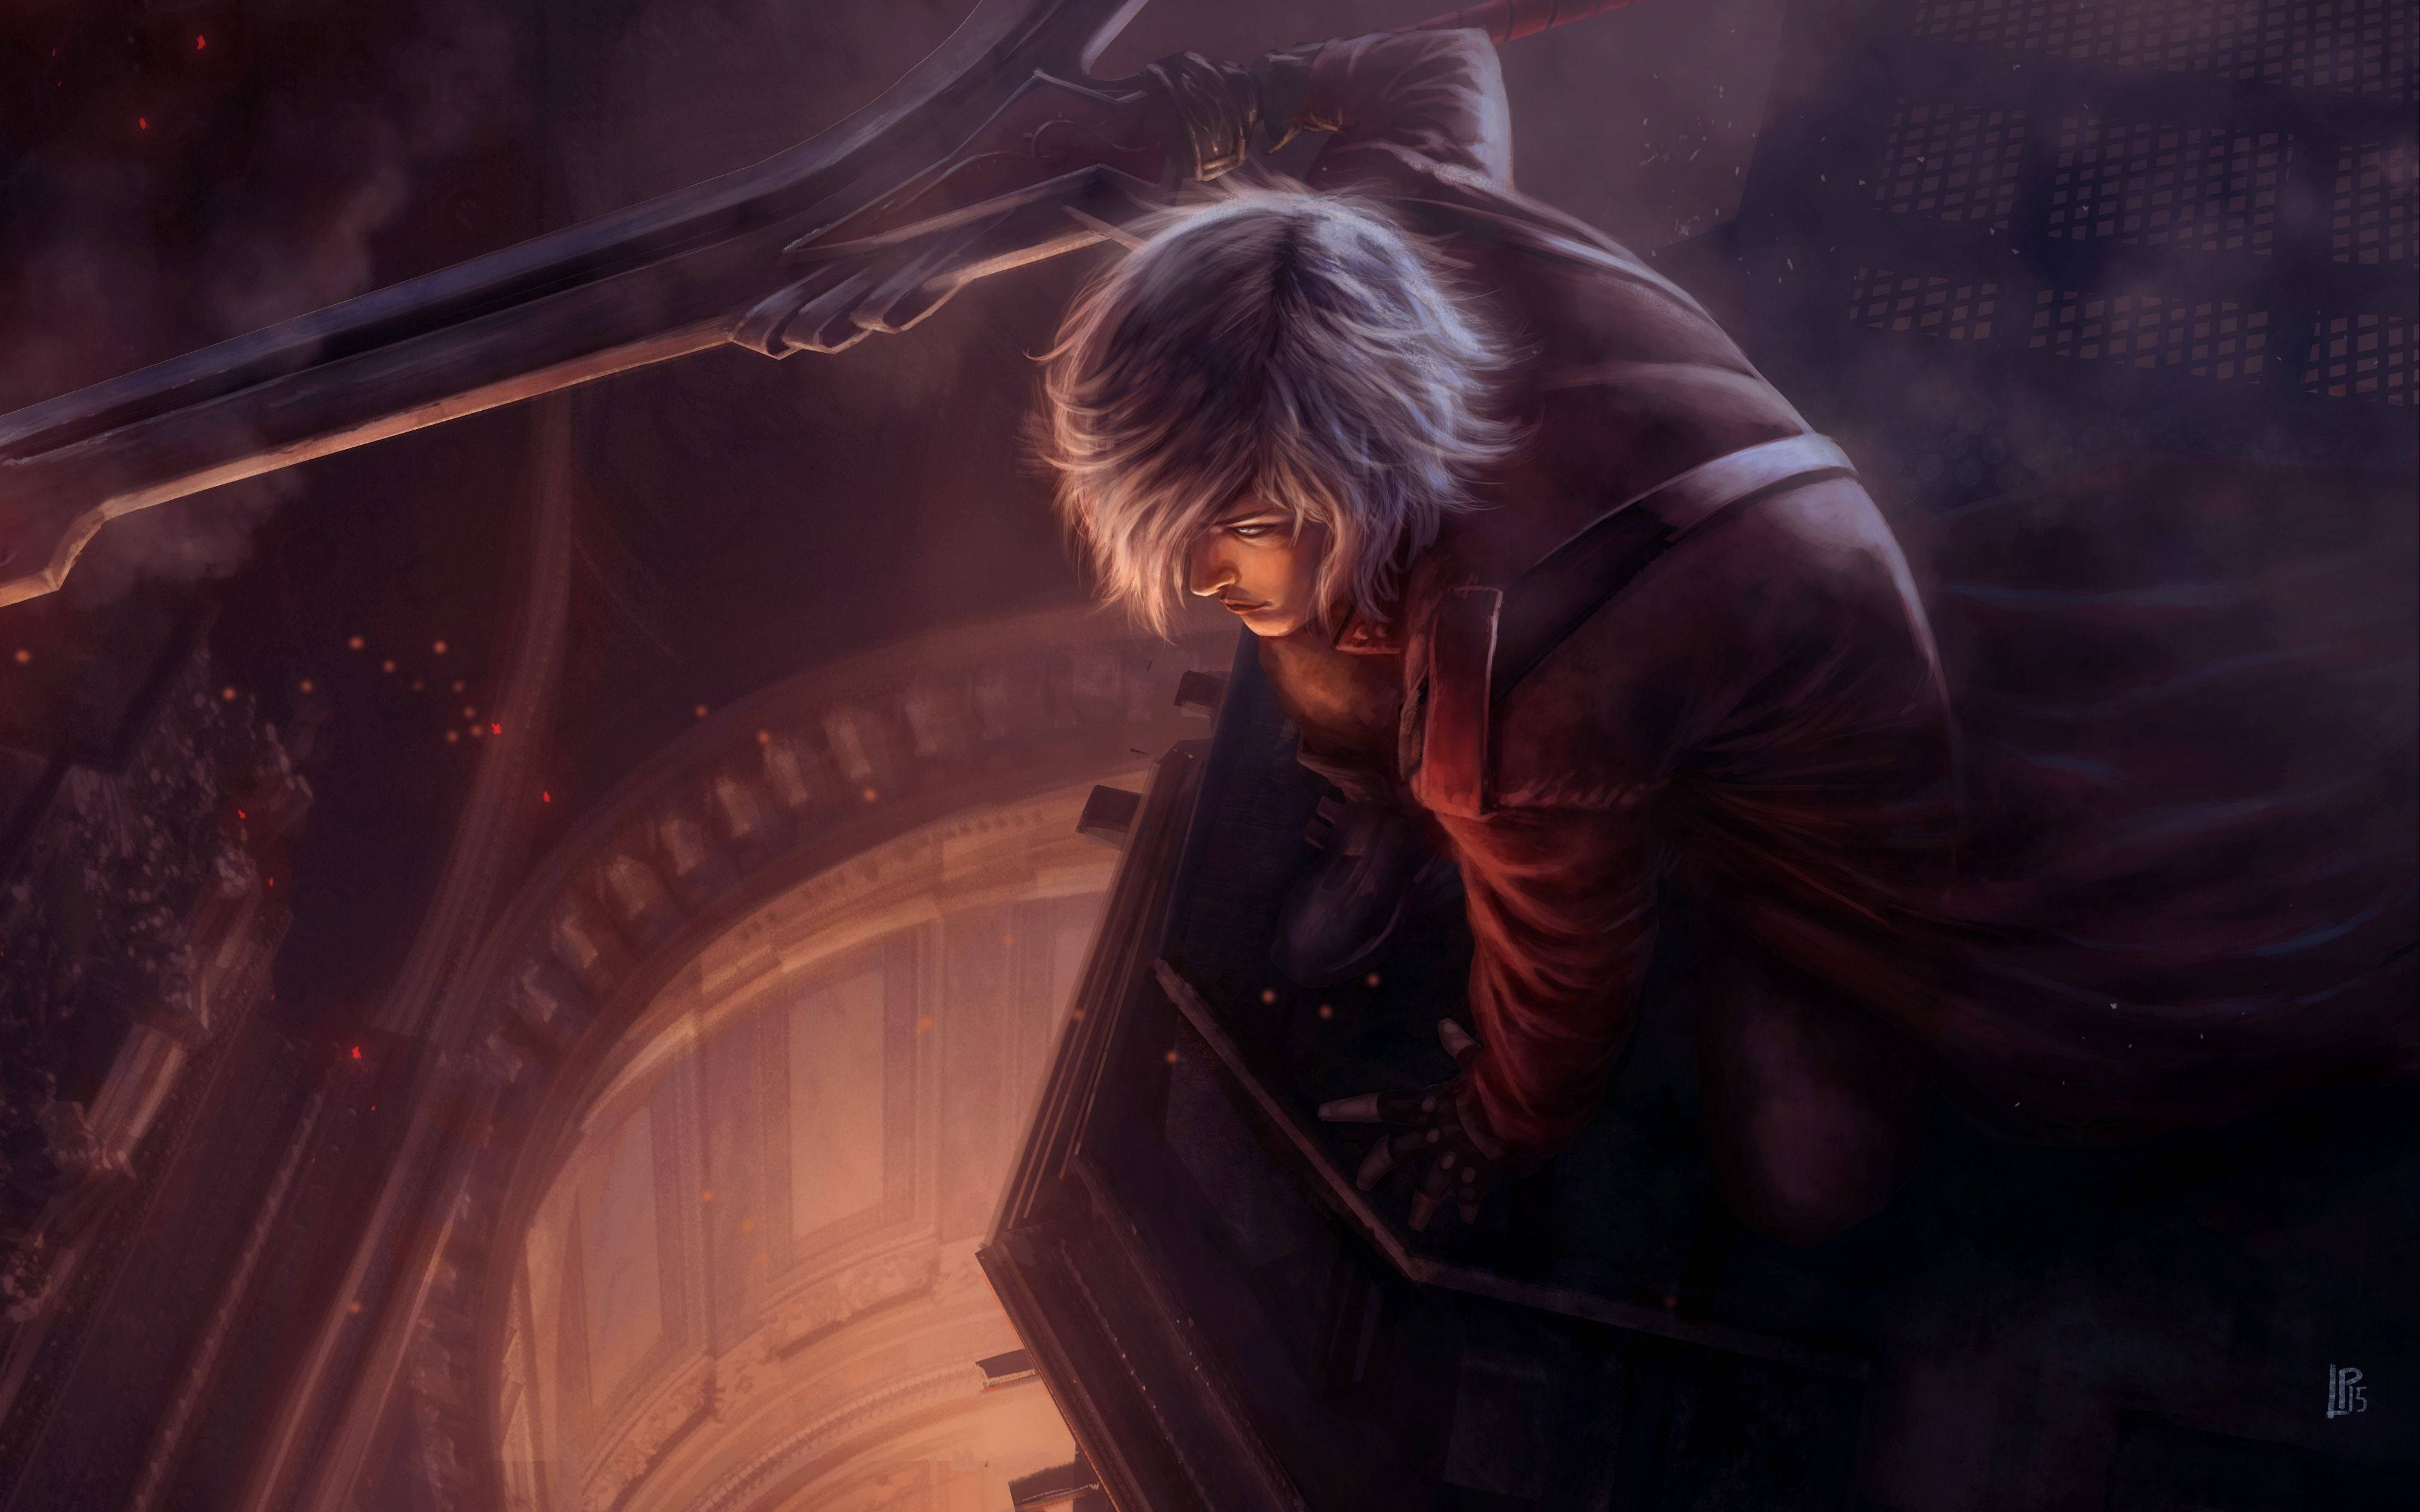 Download Dante putting his devilish strength and skill to the test